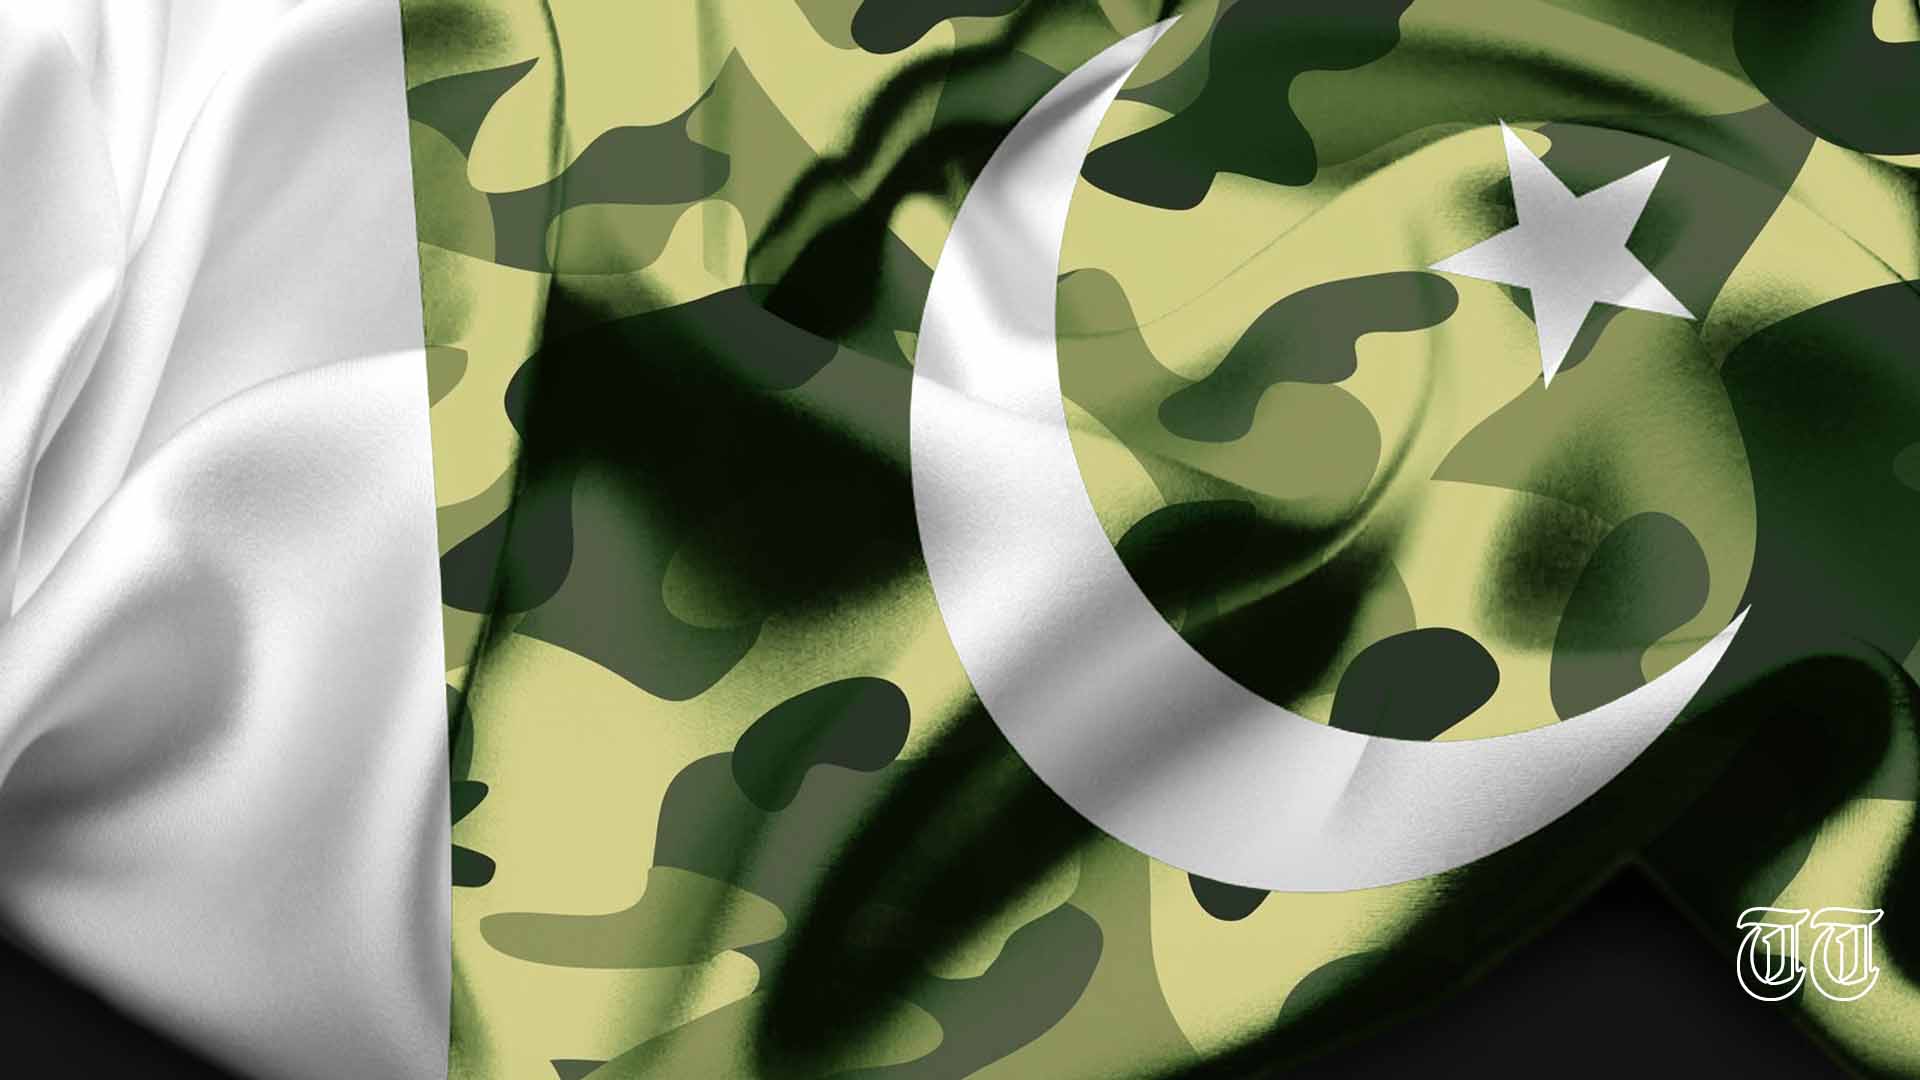 An illustration of the Pakistani flag is shown. — FILE/THE THURSDAY TIMES